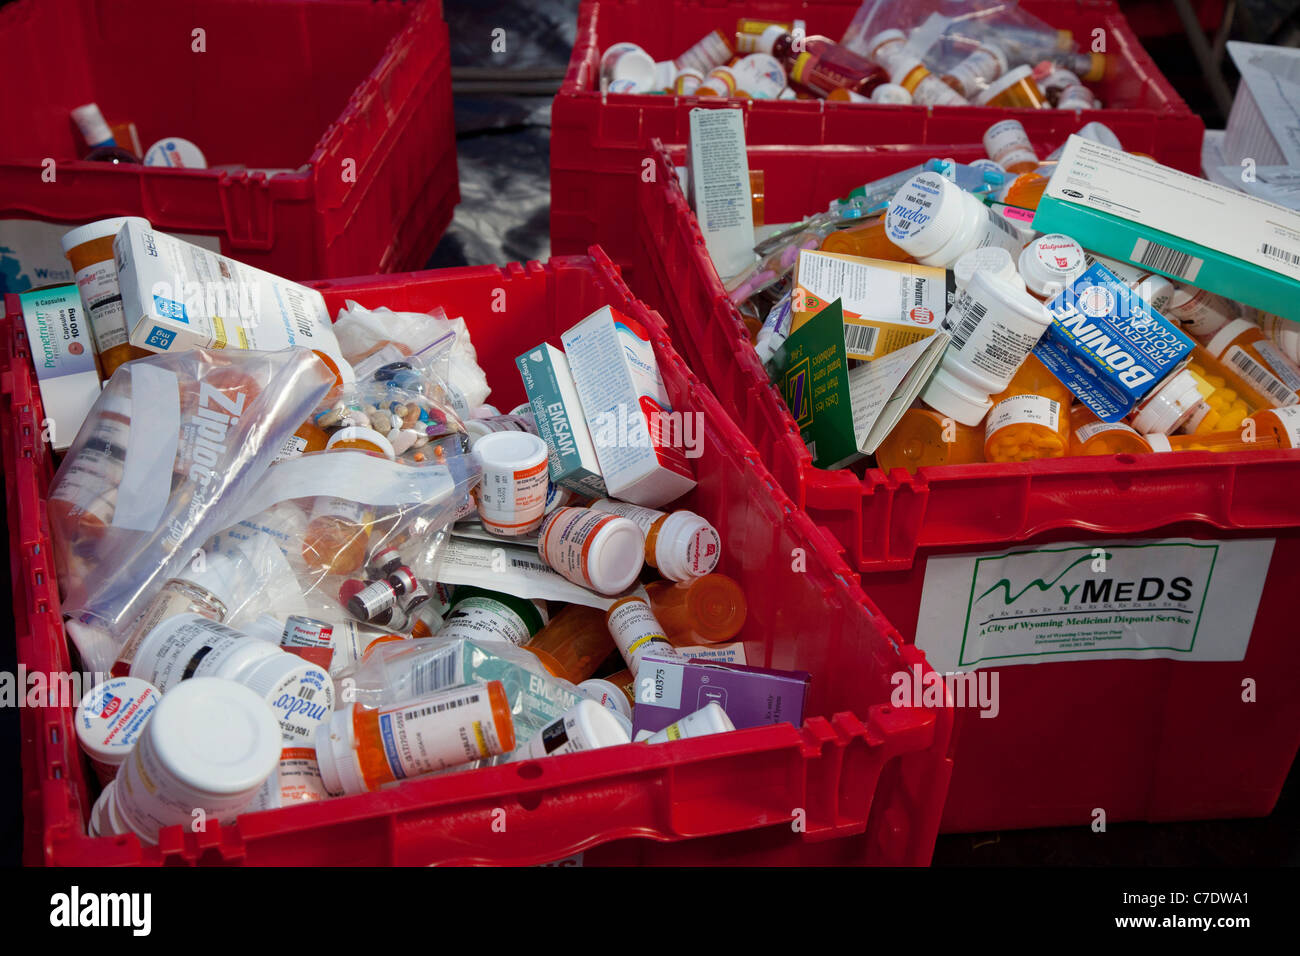 Pharmacists collect unwanted or expired prescription and over-the-counter medicines for safe disposal. Stock Photo